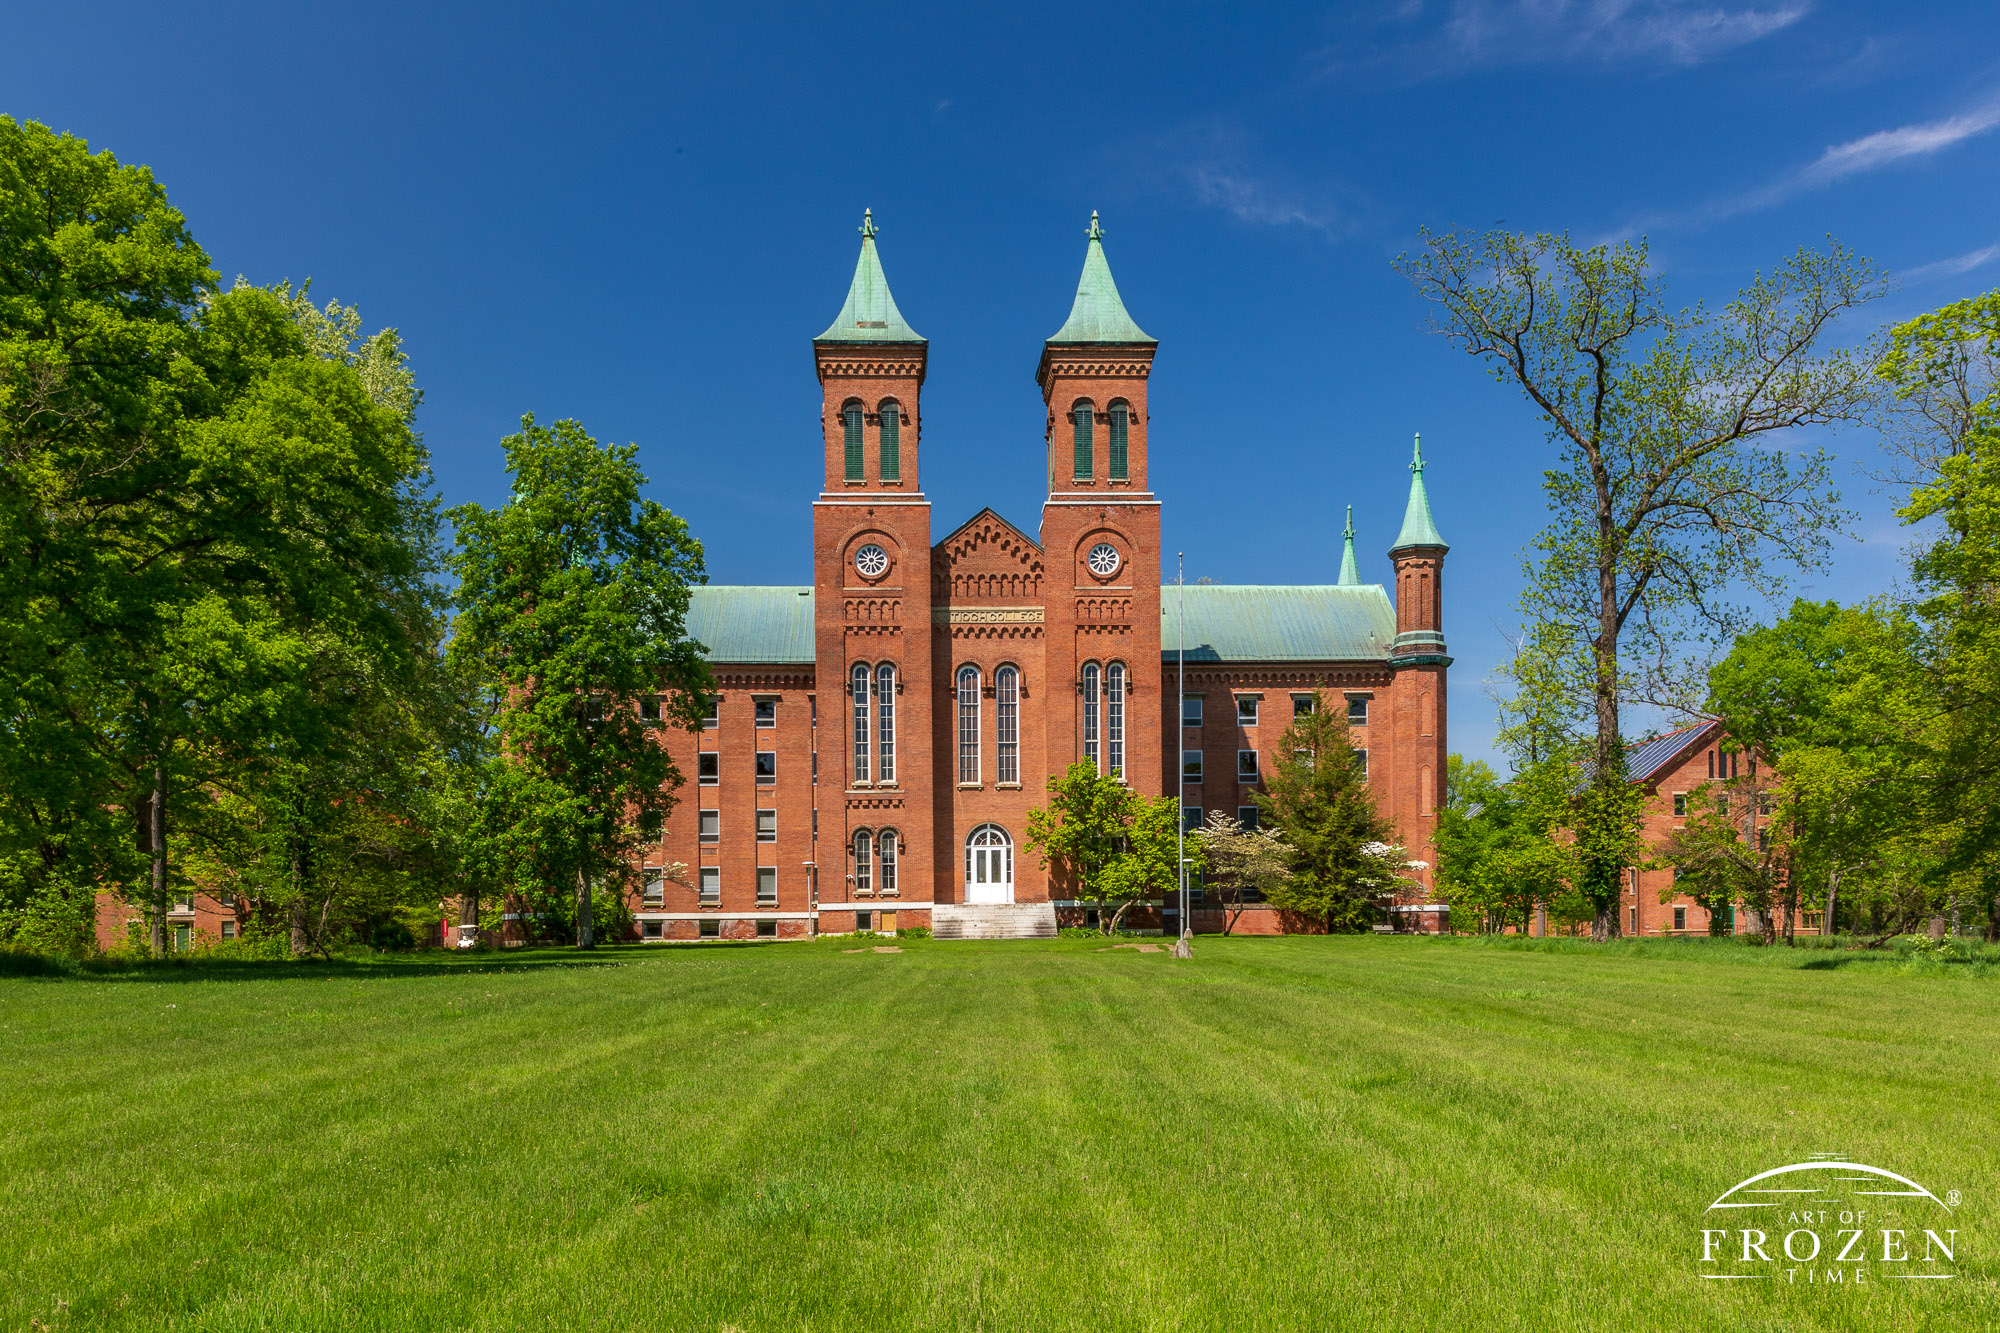 The history of Antioch College and Yellow Springs Ohio will always be interwined, but on this spring day Antioch Hall stretches into the blue skies over Greene County